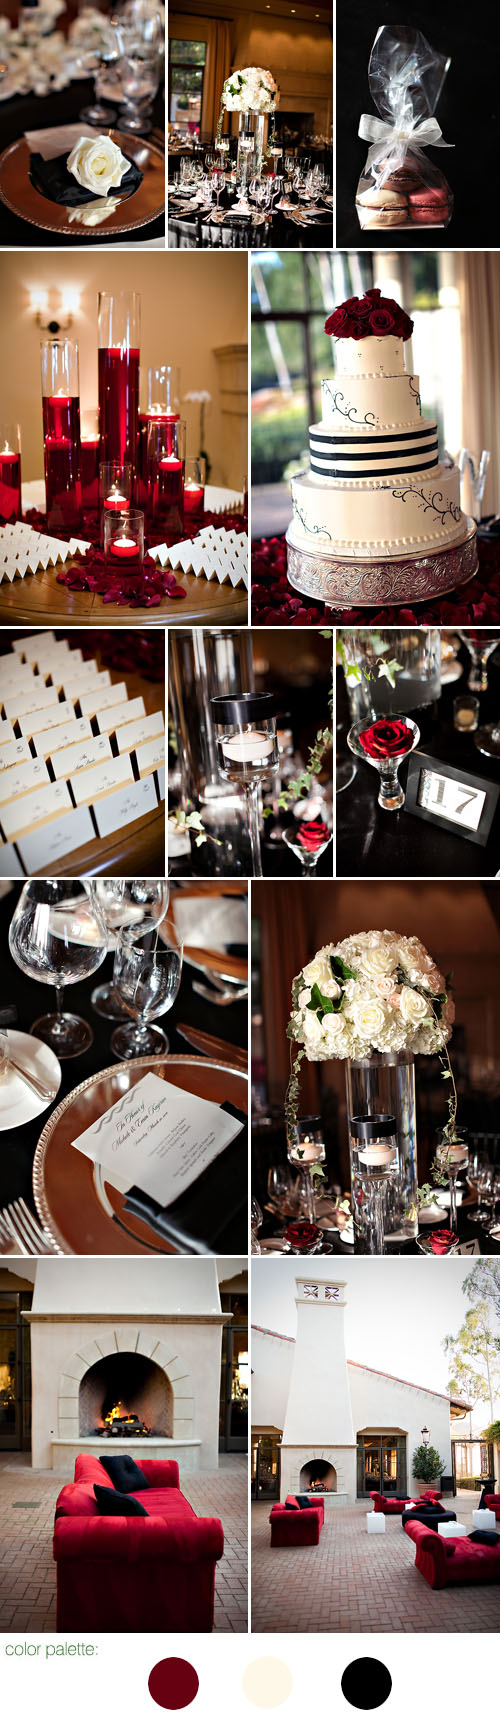 classic and elegant real wedding at The Resort at Pelican Hill, images by Jasmine Star Photography